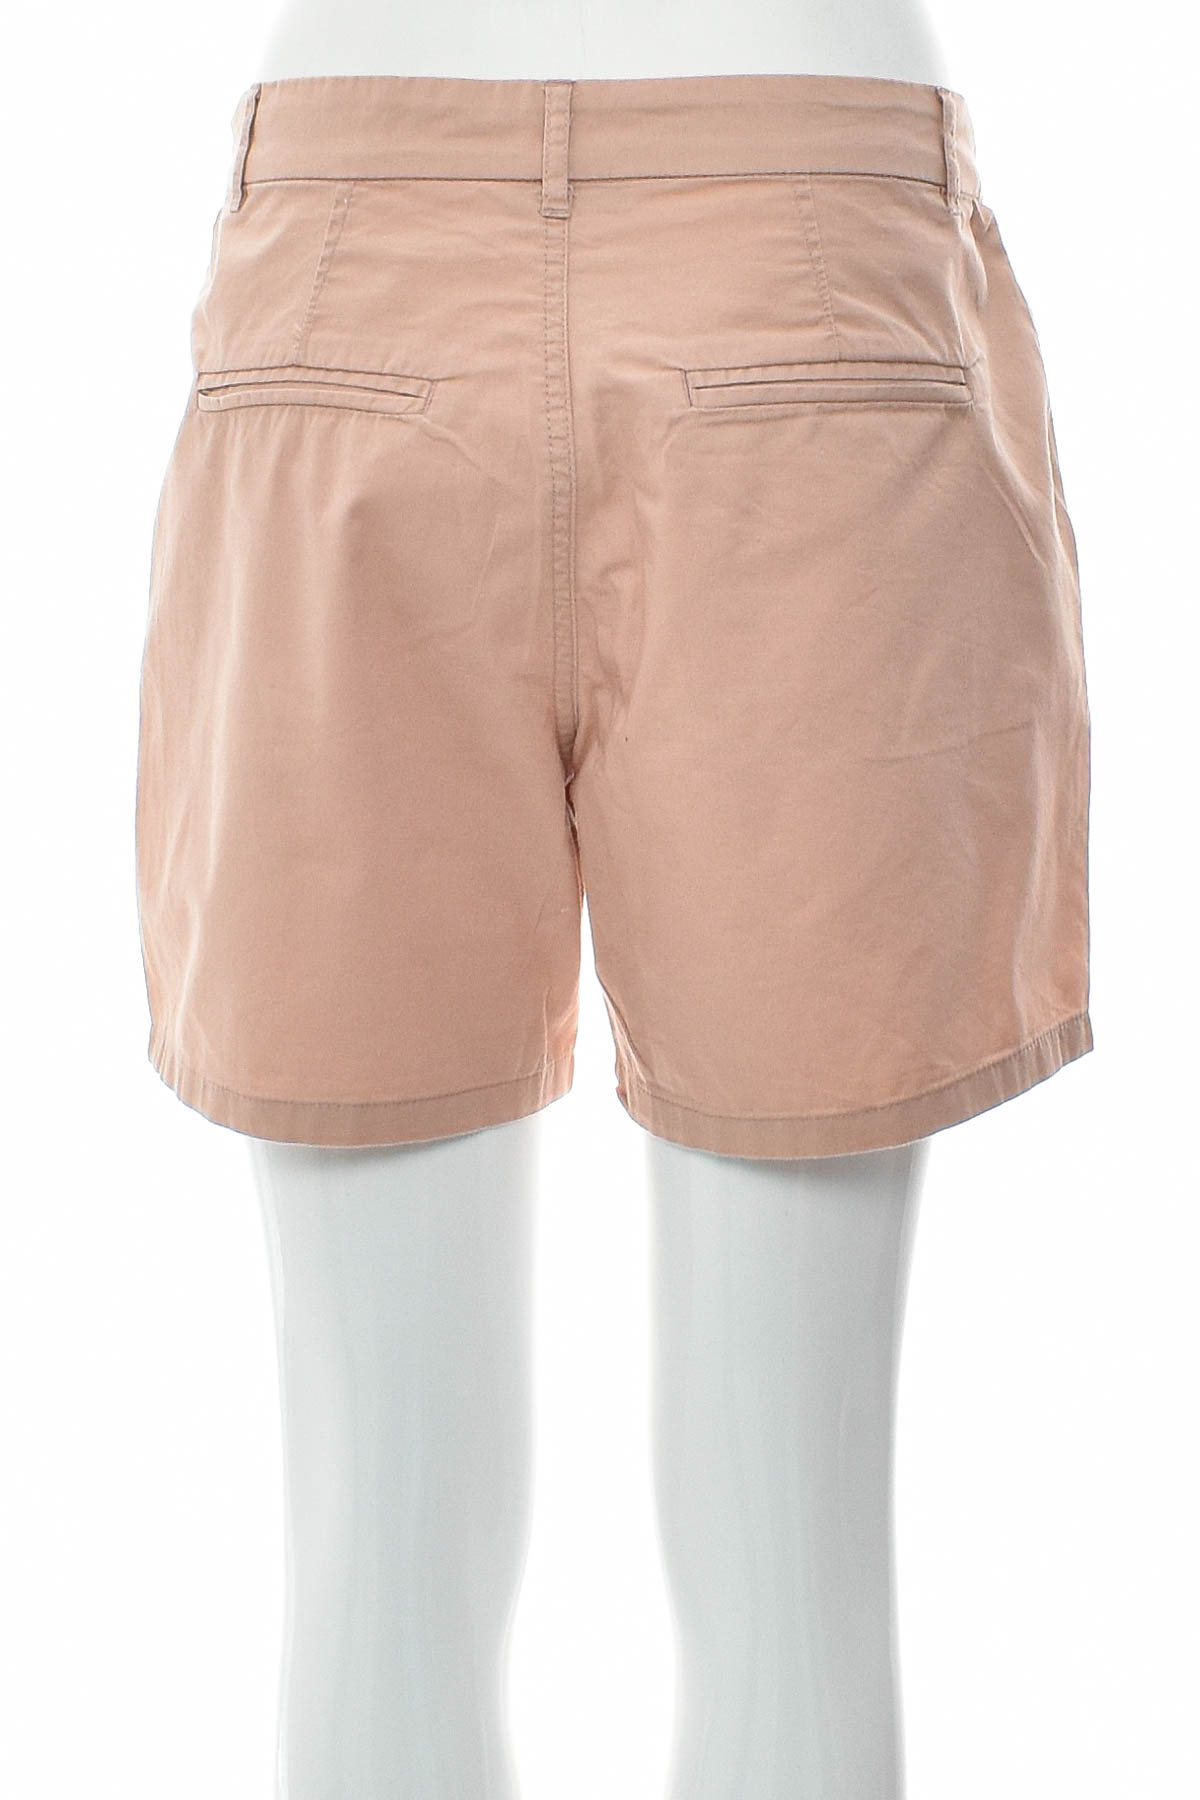 Female shorts - ONLY - 1